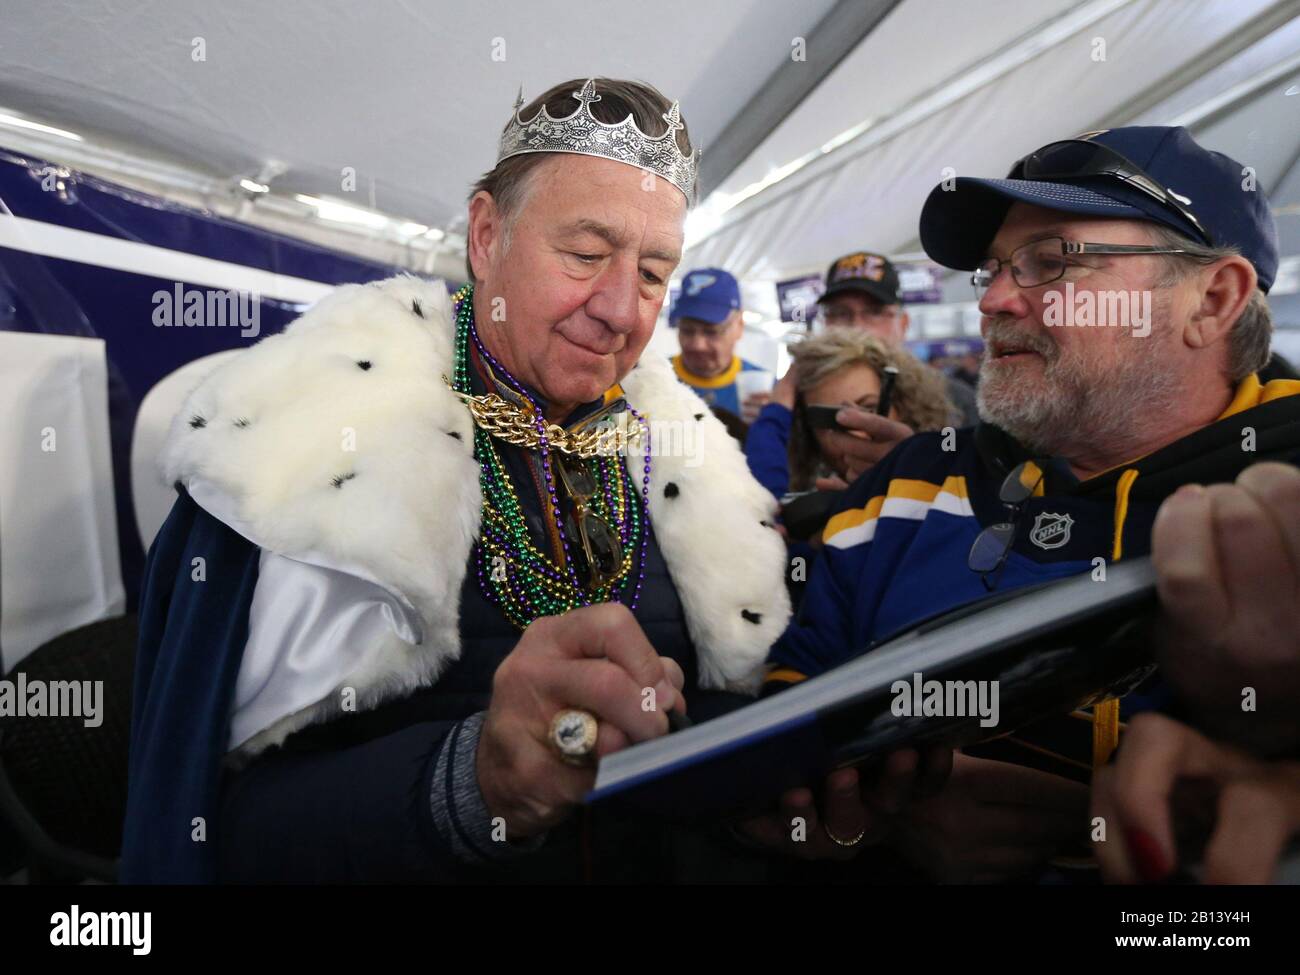 https://c8.alamy.com/comp/2B13Y4H/st-louis-united-states-22nd-feb-2020-former-st-louis-blues-and-member-of-the-national-hockey-hall-of-fame-bernie-federko-signs-an-autograph-for-a-fan-during-the-st-louis-mardi-gras-parade-in-st-louis-on-saturday-february-22-2020-the-st-louis-blues-winner-of-the-2019-stanley-cup-were-the-theme-of-the-mardi-gras-parade-with-federko-serving-as-the-grand-marshall-photo-by-bill-greenblattupi-credit-upialamy-live-news-2B13Y4H.jpg